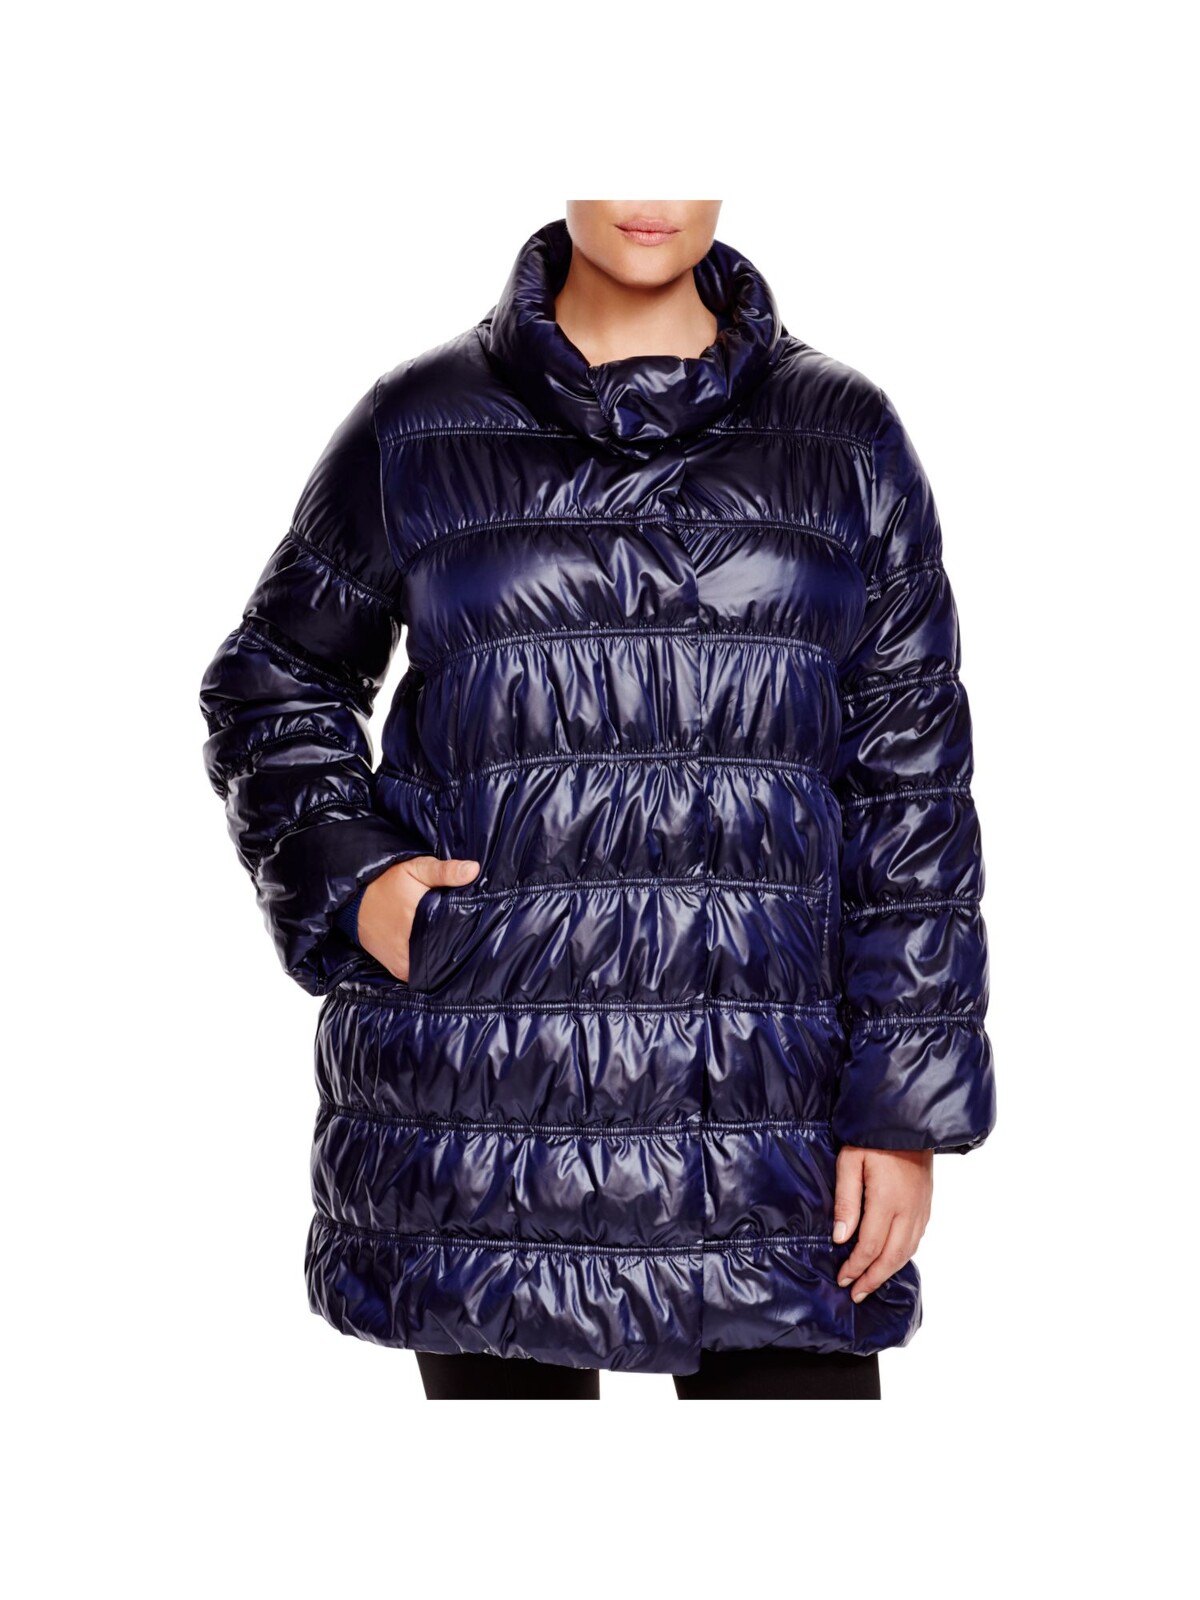 EILEEN FISHER Womens Navy Zippered Pocketed Down Puffer Winter Jacket Coat Plus 2X